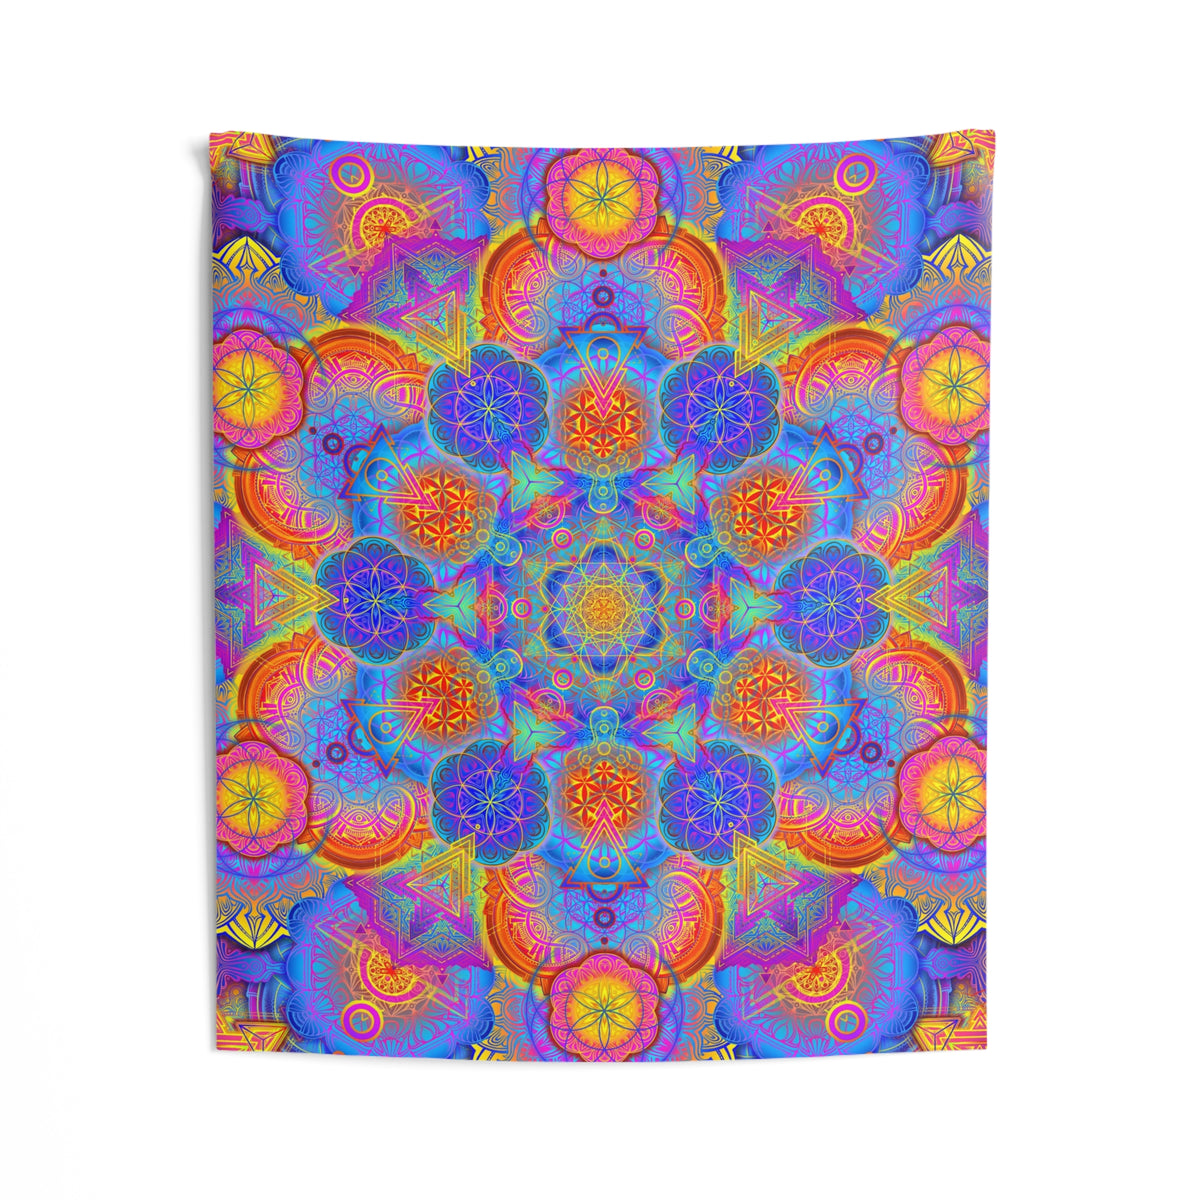 Psychedelic Metatron's Cube Mandala Wall Tapestry